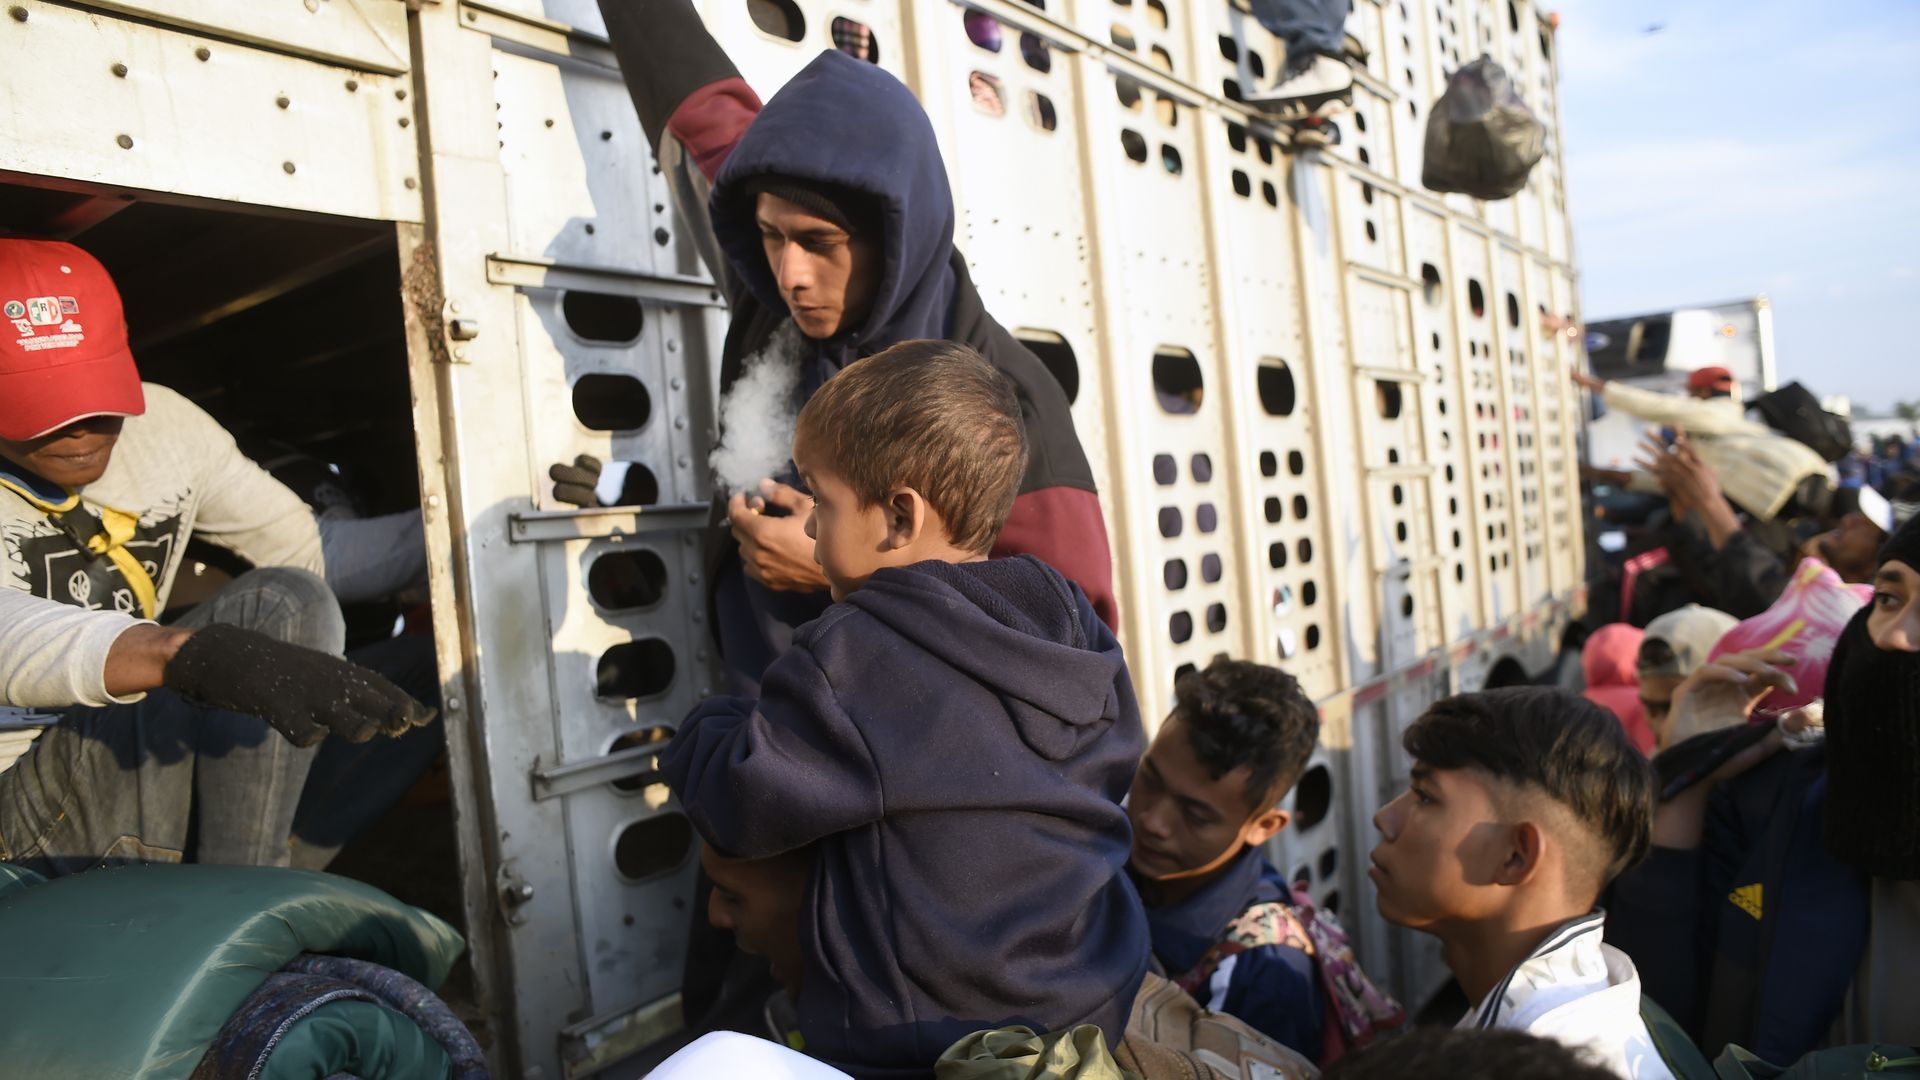 A crowd of Central American migrants, including some children, crowd around a boxcar where they are trying to get on to travel toward the U.S.